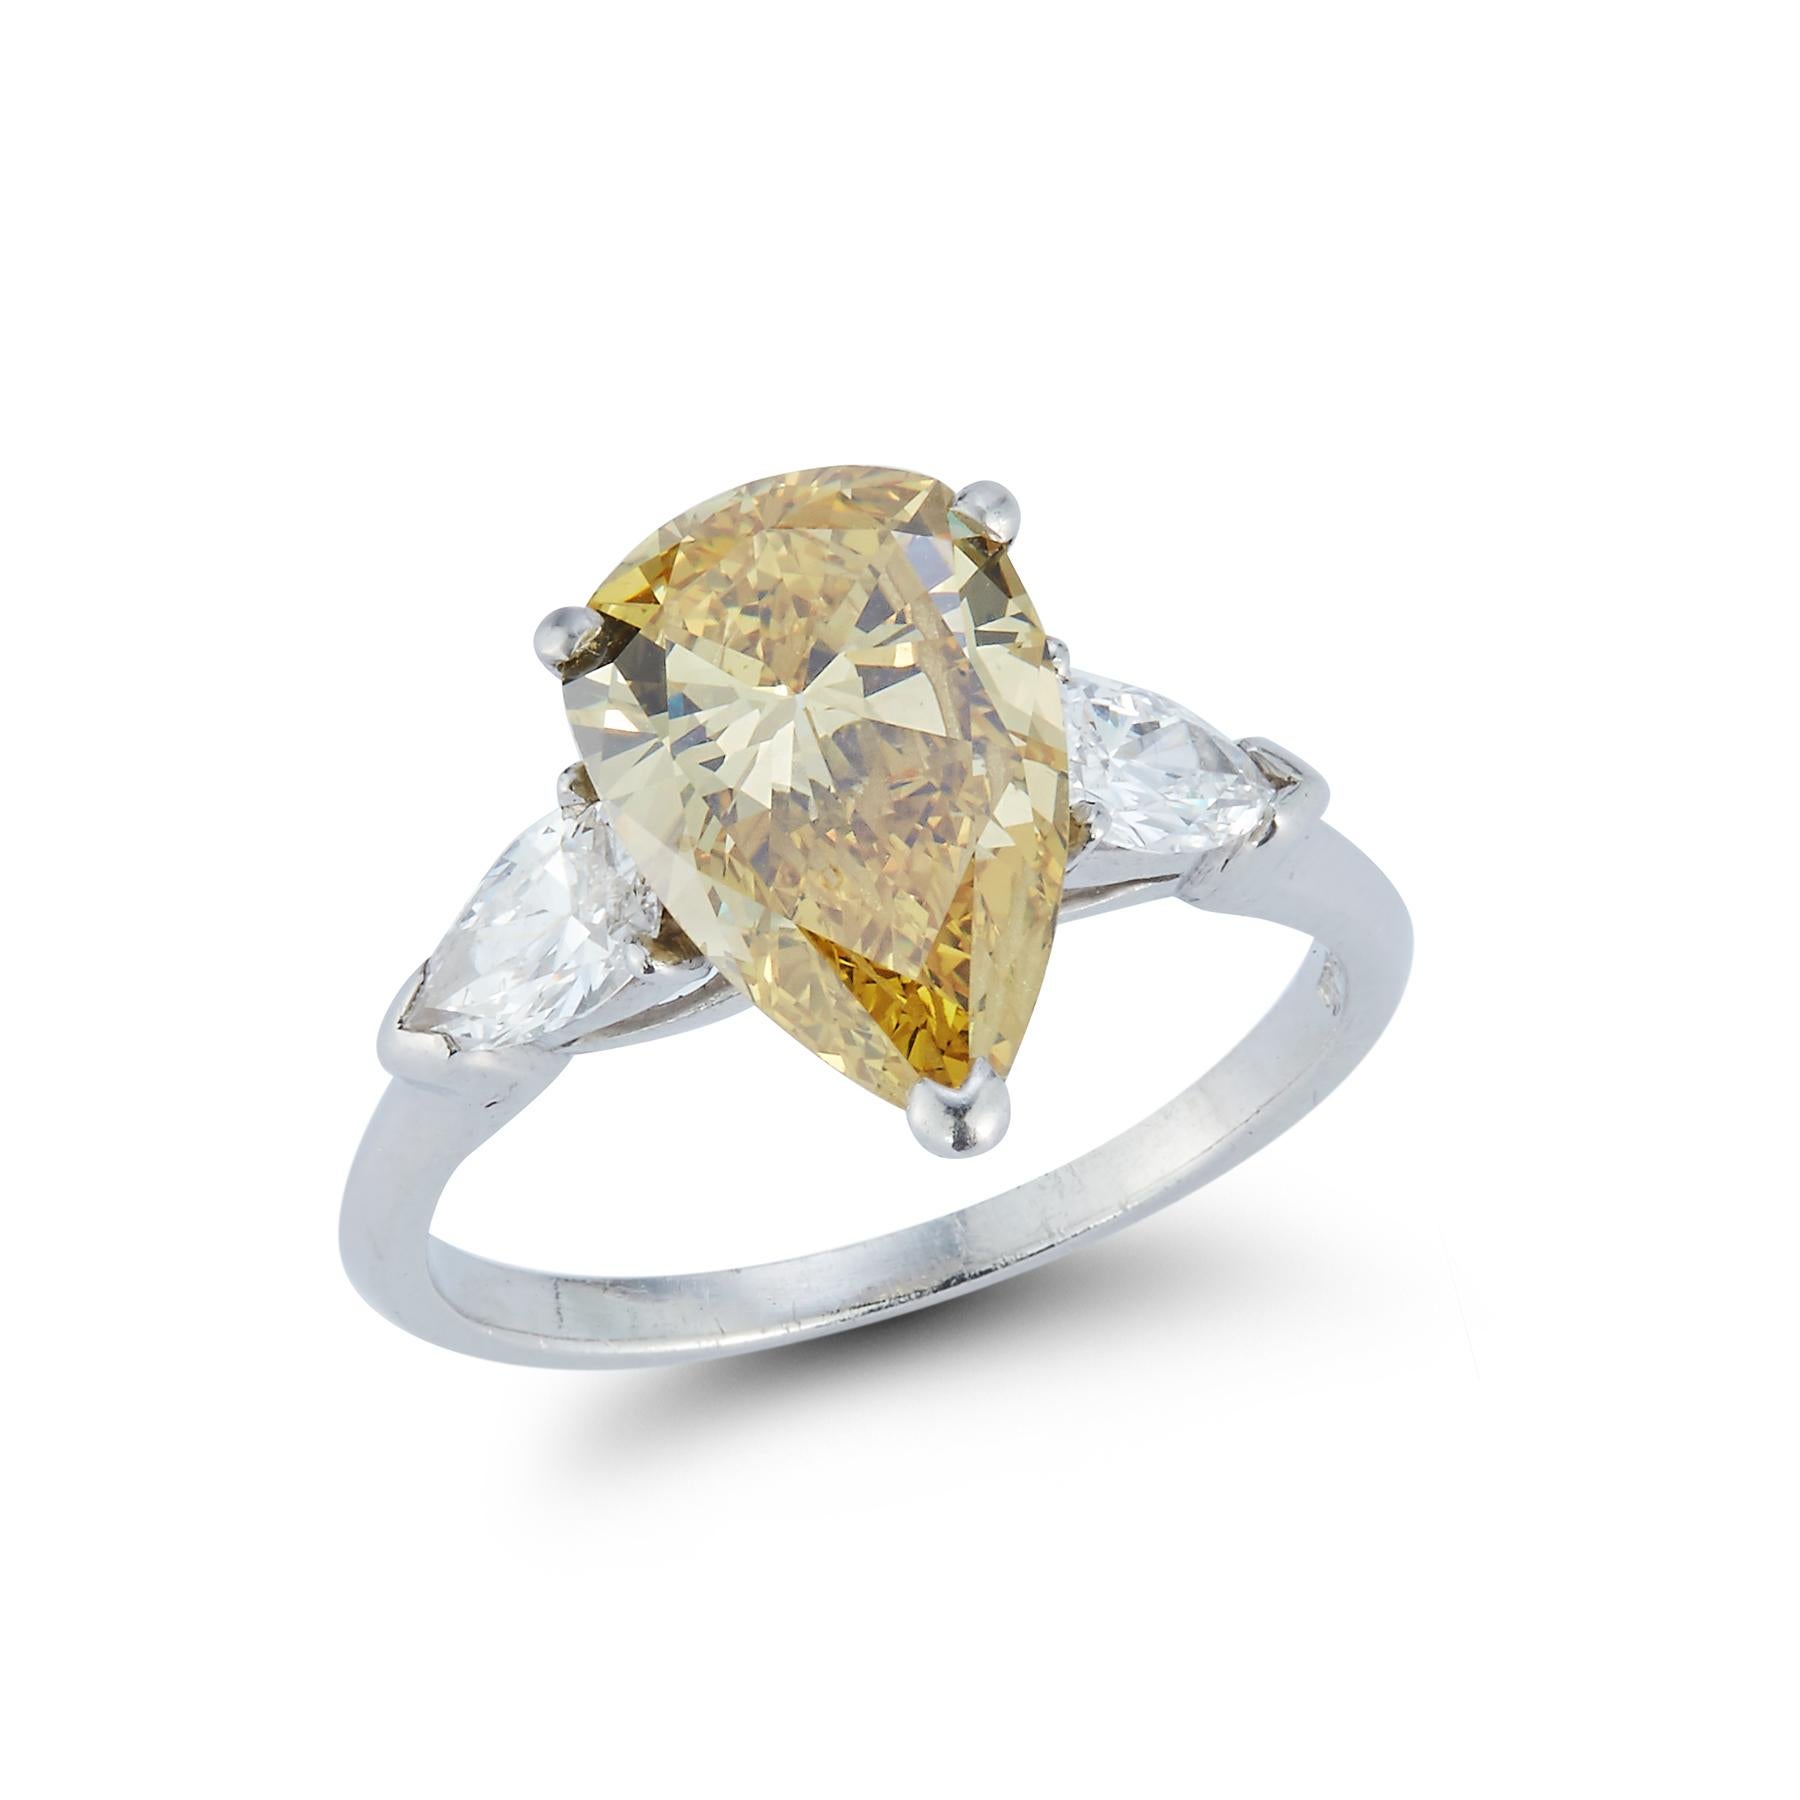 Platinum Engagement Ring with Center Pear Shape diamond weight: 2.96 cts certified by GIA laboratory: Color: fancy deep brownish yellow. Clarity: VS2. Color origin: natural

 2 Side Pear Shaped diamonds approximately .67 cts

Ring Size 6.5